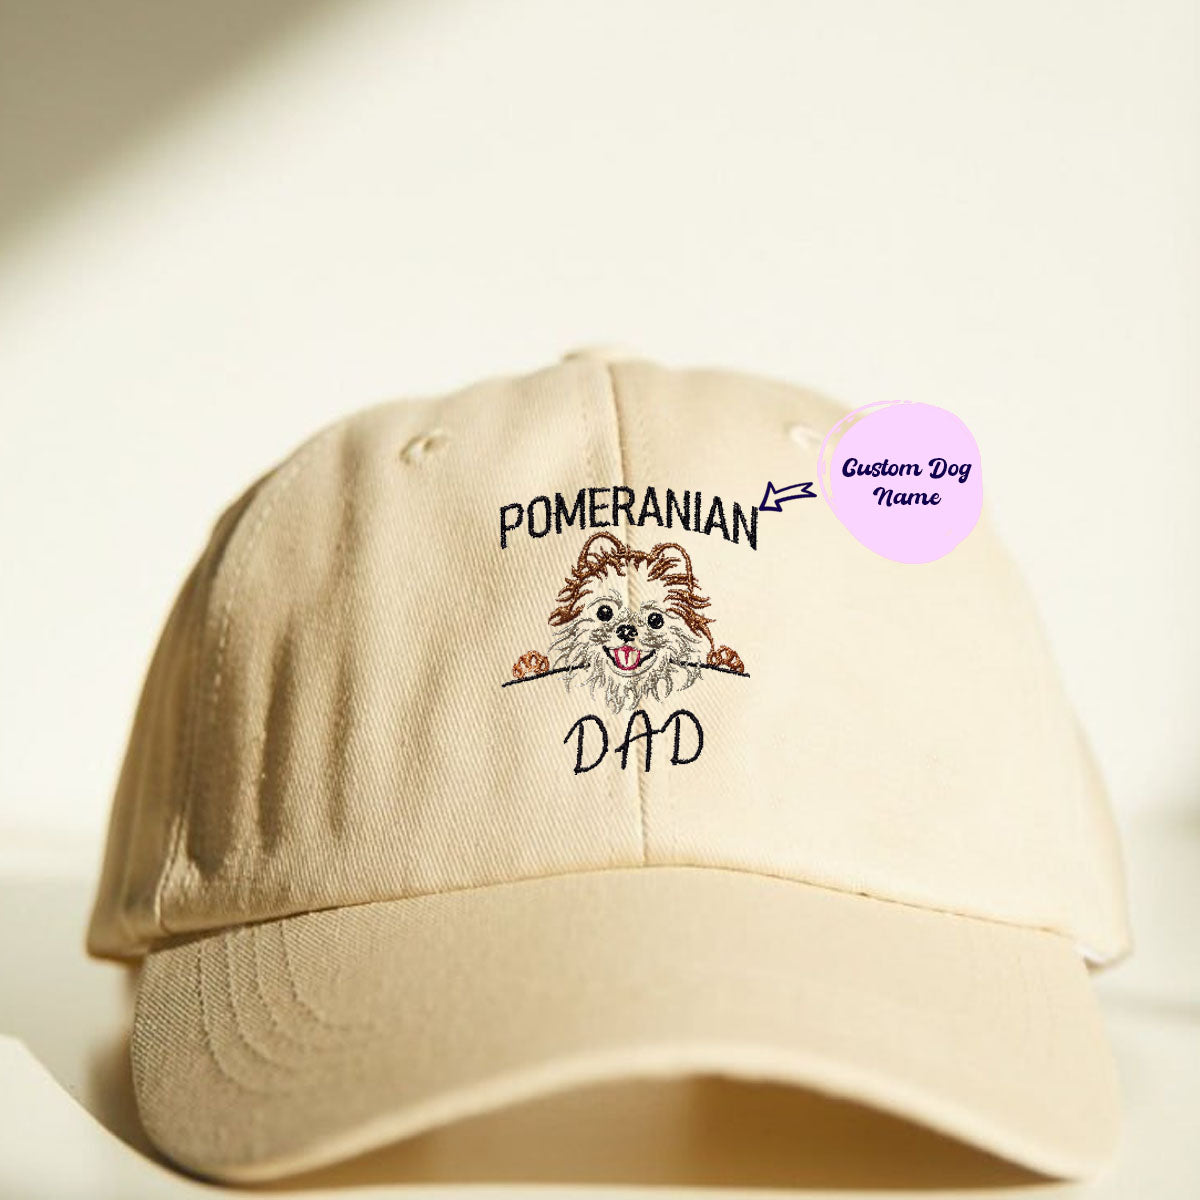 Custom Pomeranian Dog Dad Embroidered Hat, Personalized Hat with Dog Name, Best Gifts For Pomeranian Lovers